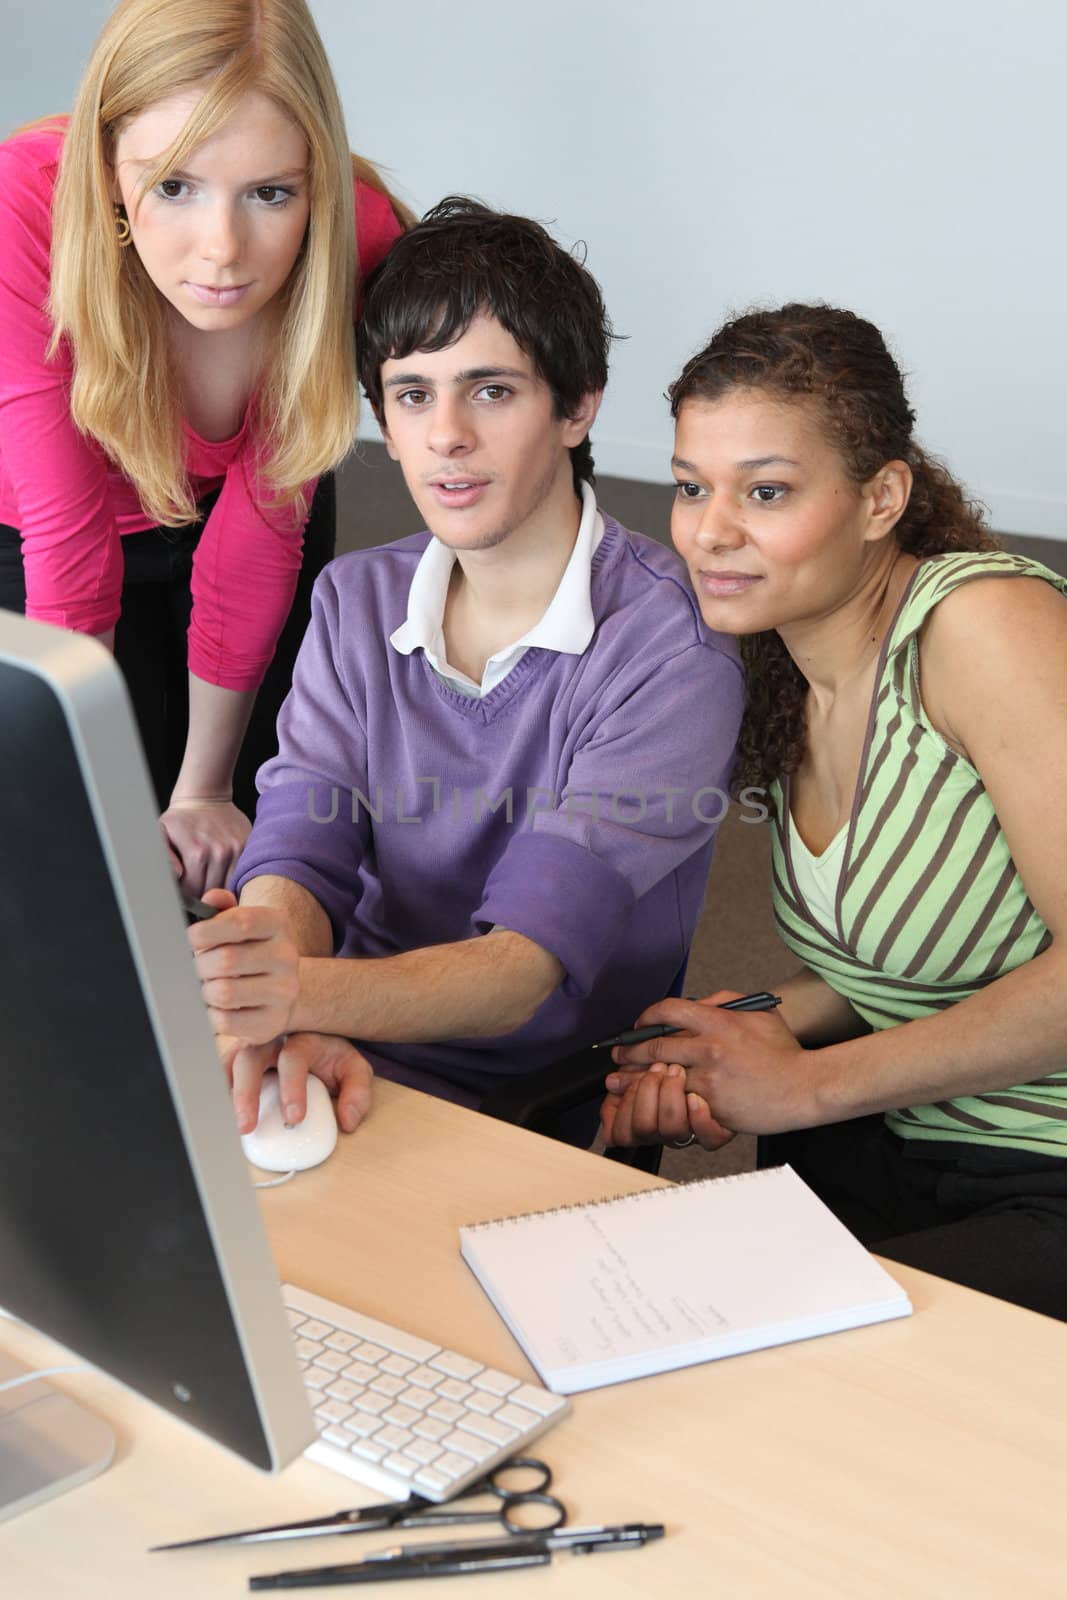 Teenagers looking at a computer screen